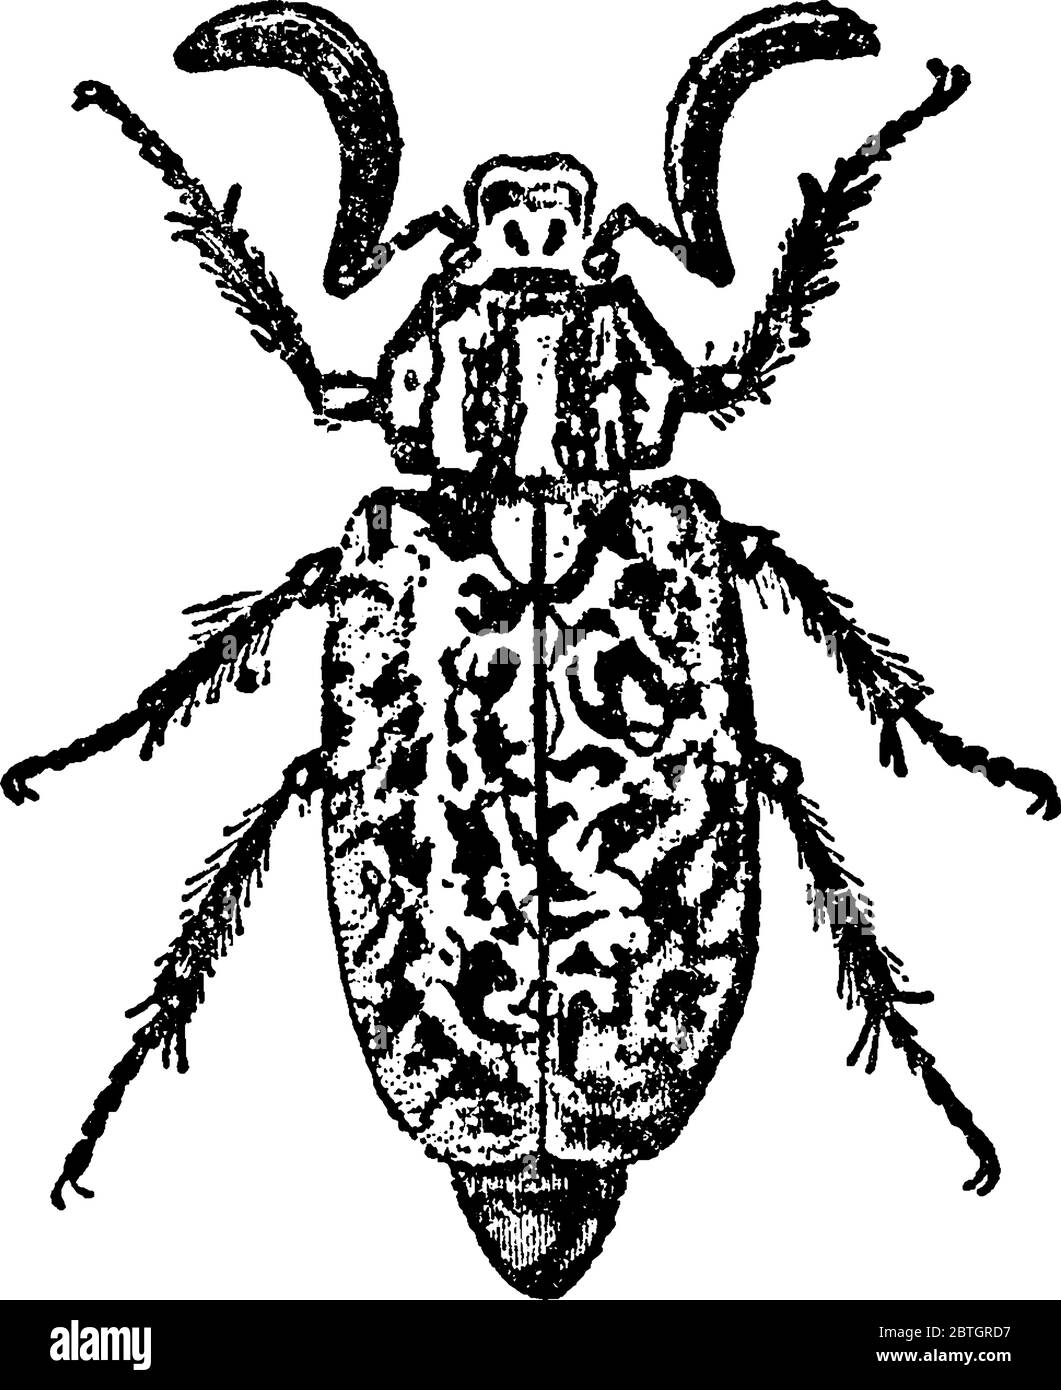 The cockchafer, bug or beetle, is a European beetle of the genus Melolontha, in the family Scarabaeidae, vintage line drawing or engraving illustratio Stock Vector